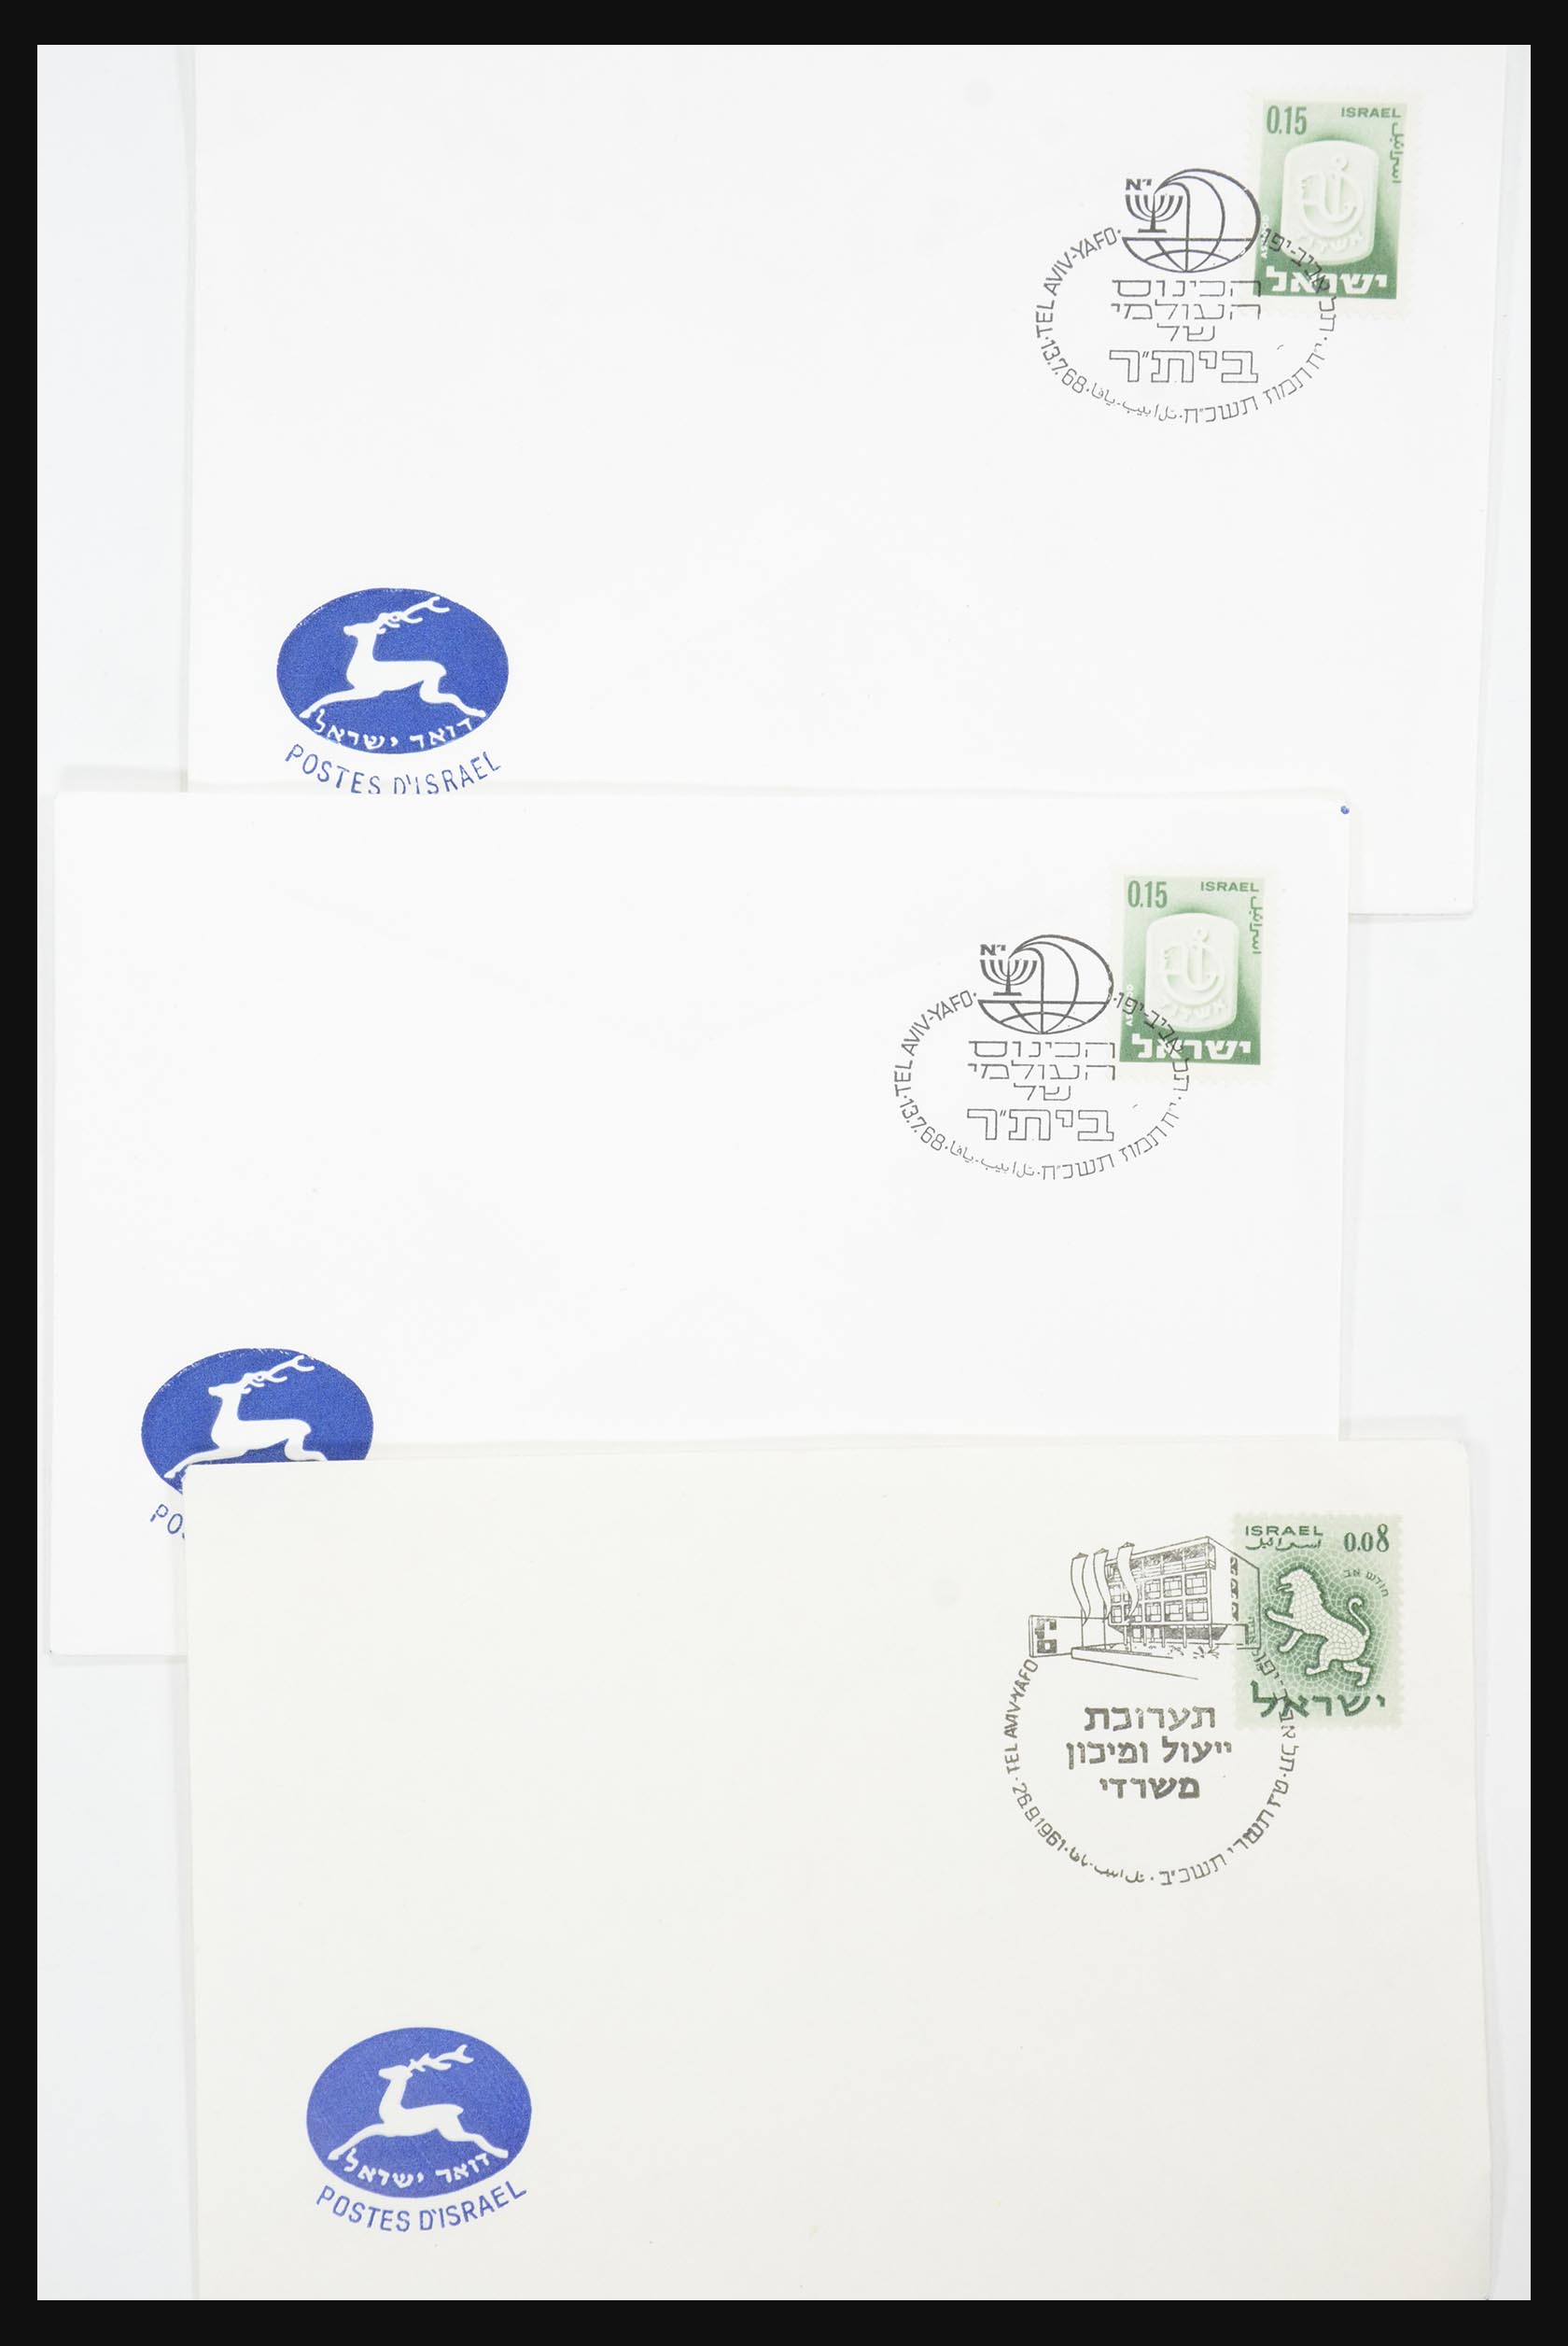 31924 025 - 31924 Israël fdc-collectie 1957-2003.